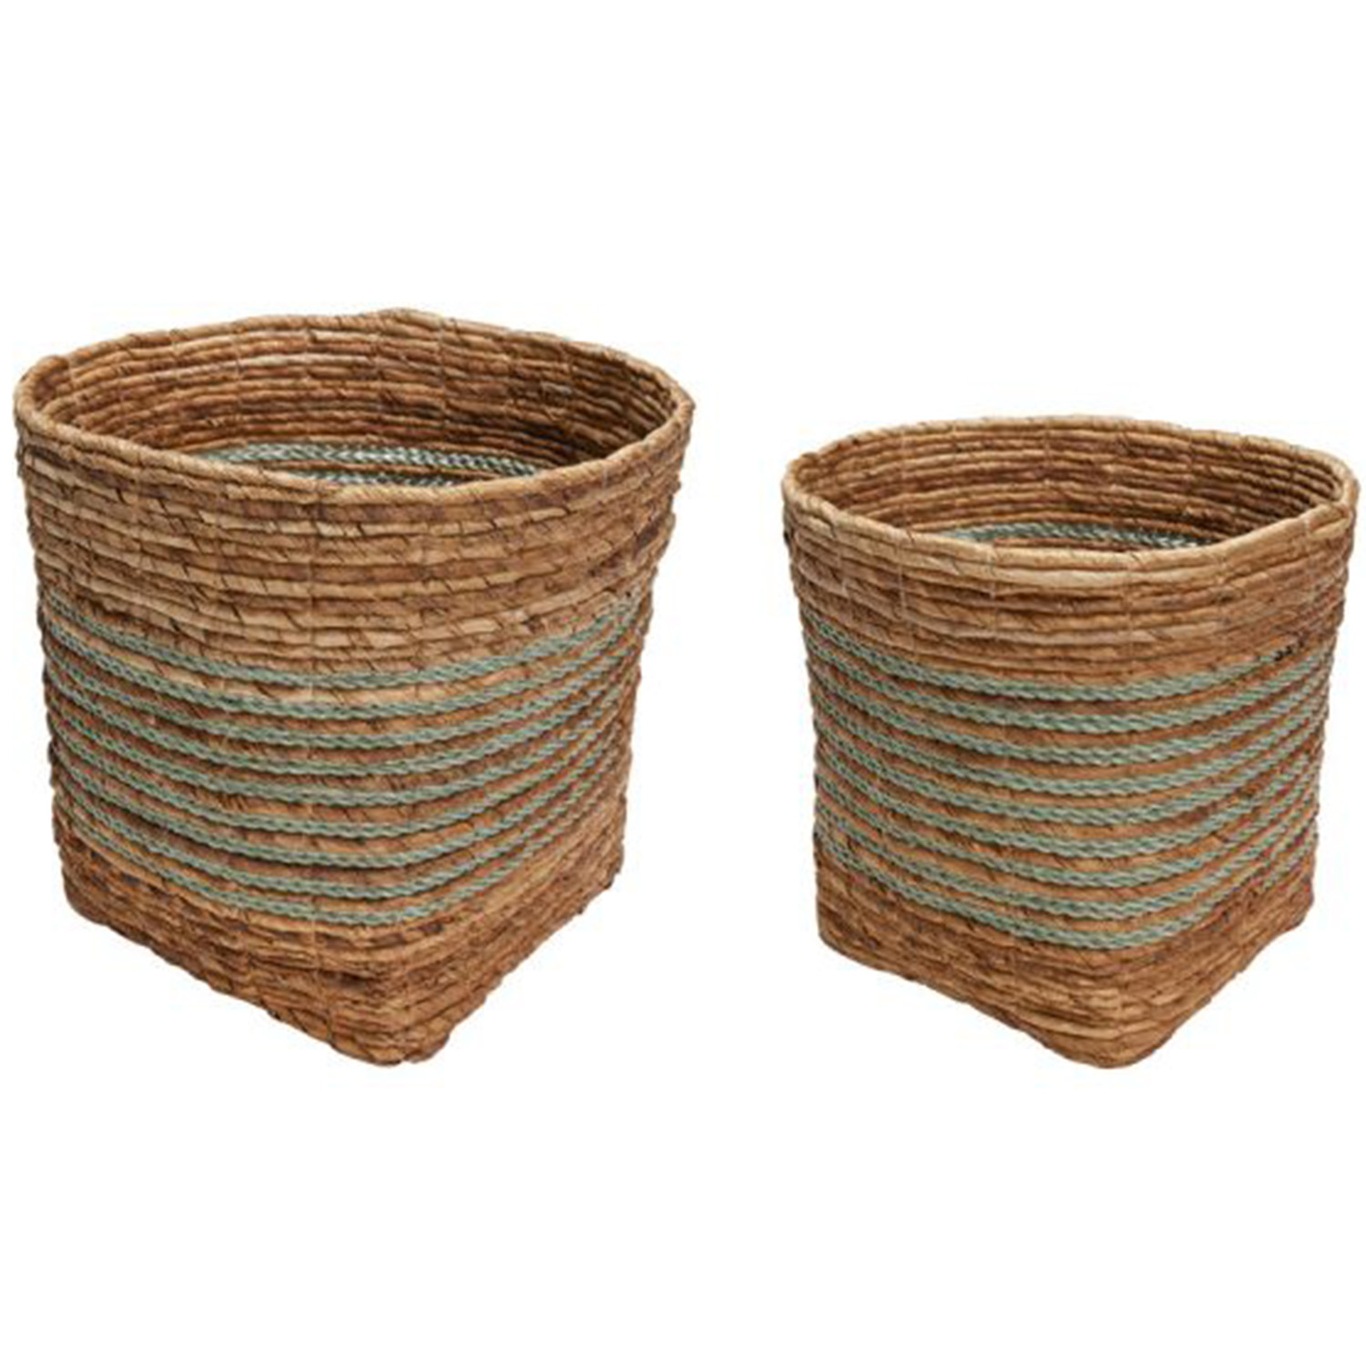 Reveal Baskets 2-pack, Mint/Natural